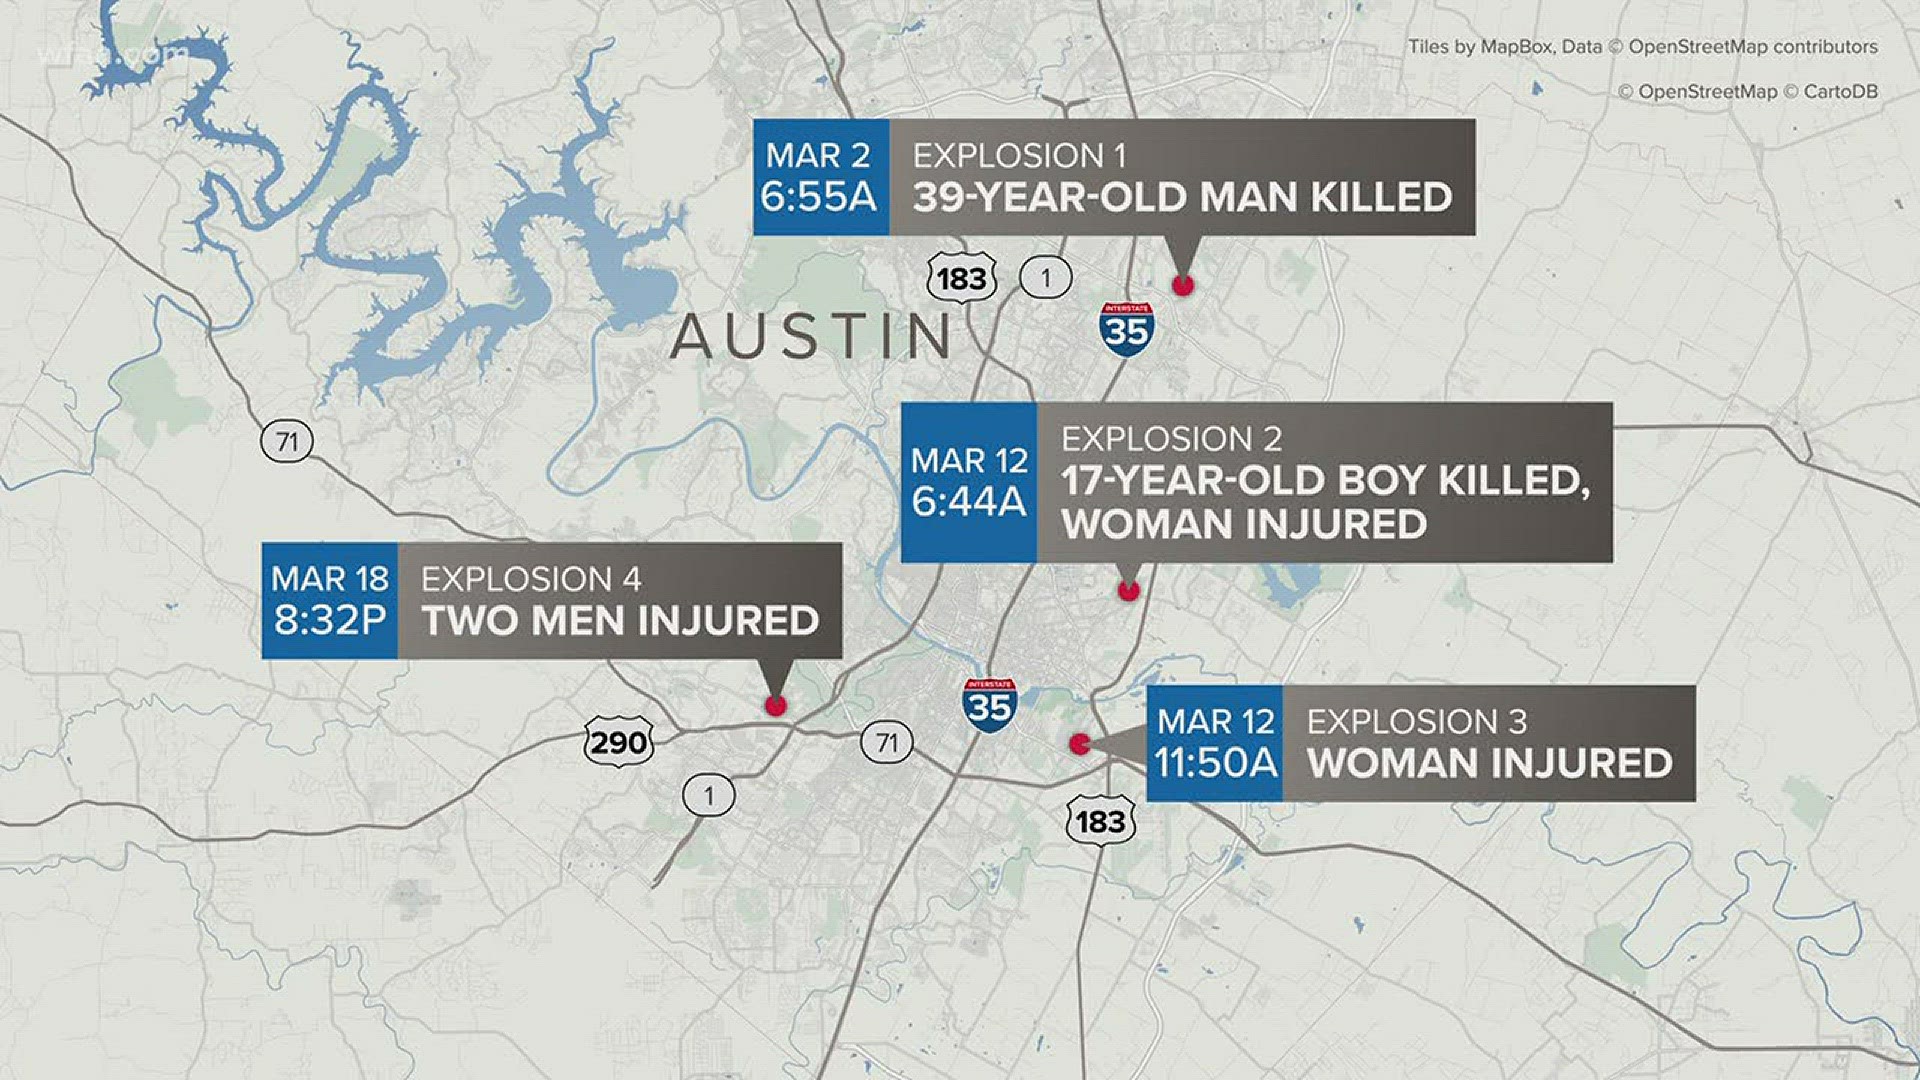 Nails in the victim's leg after fourth bombing in Austin